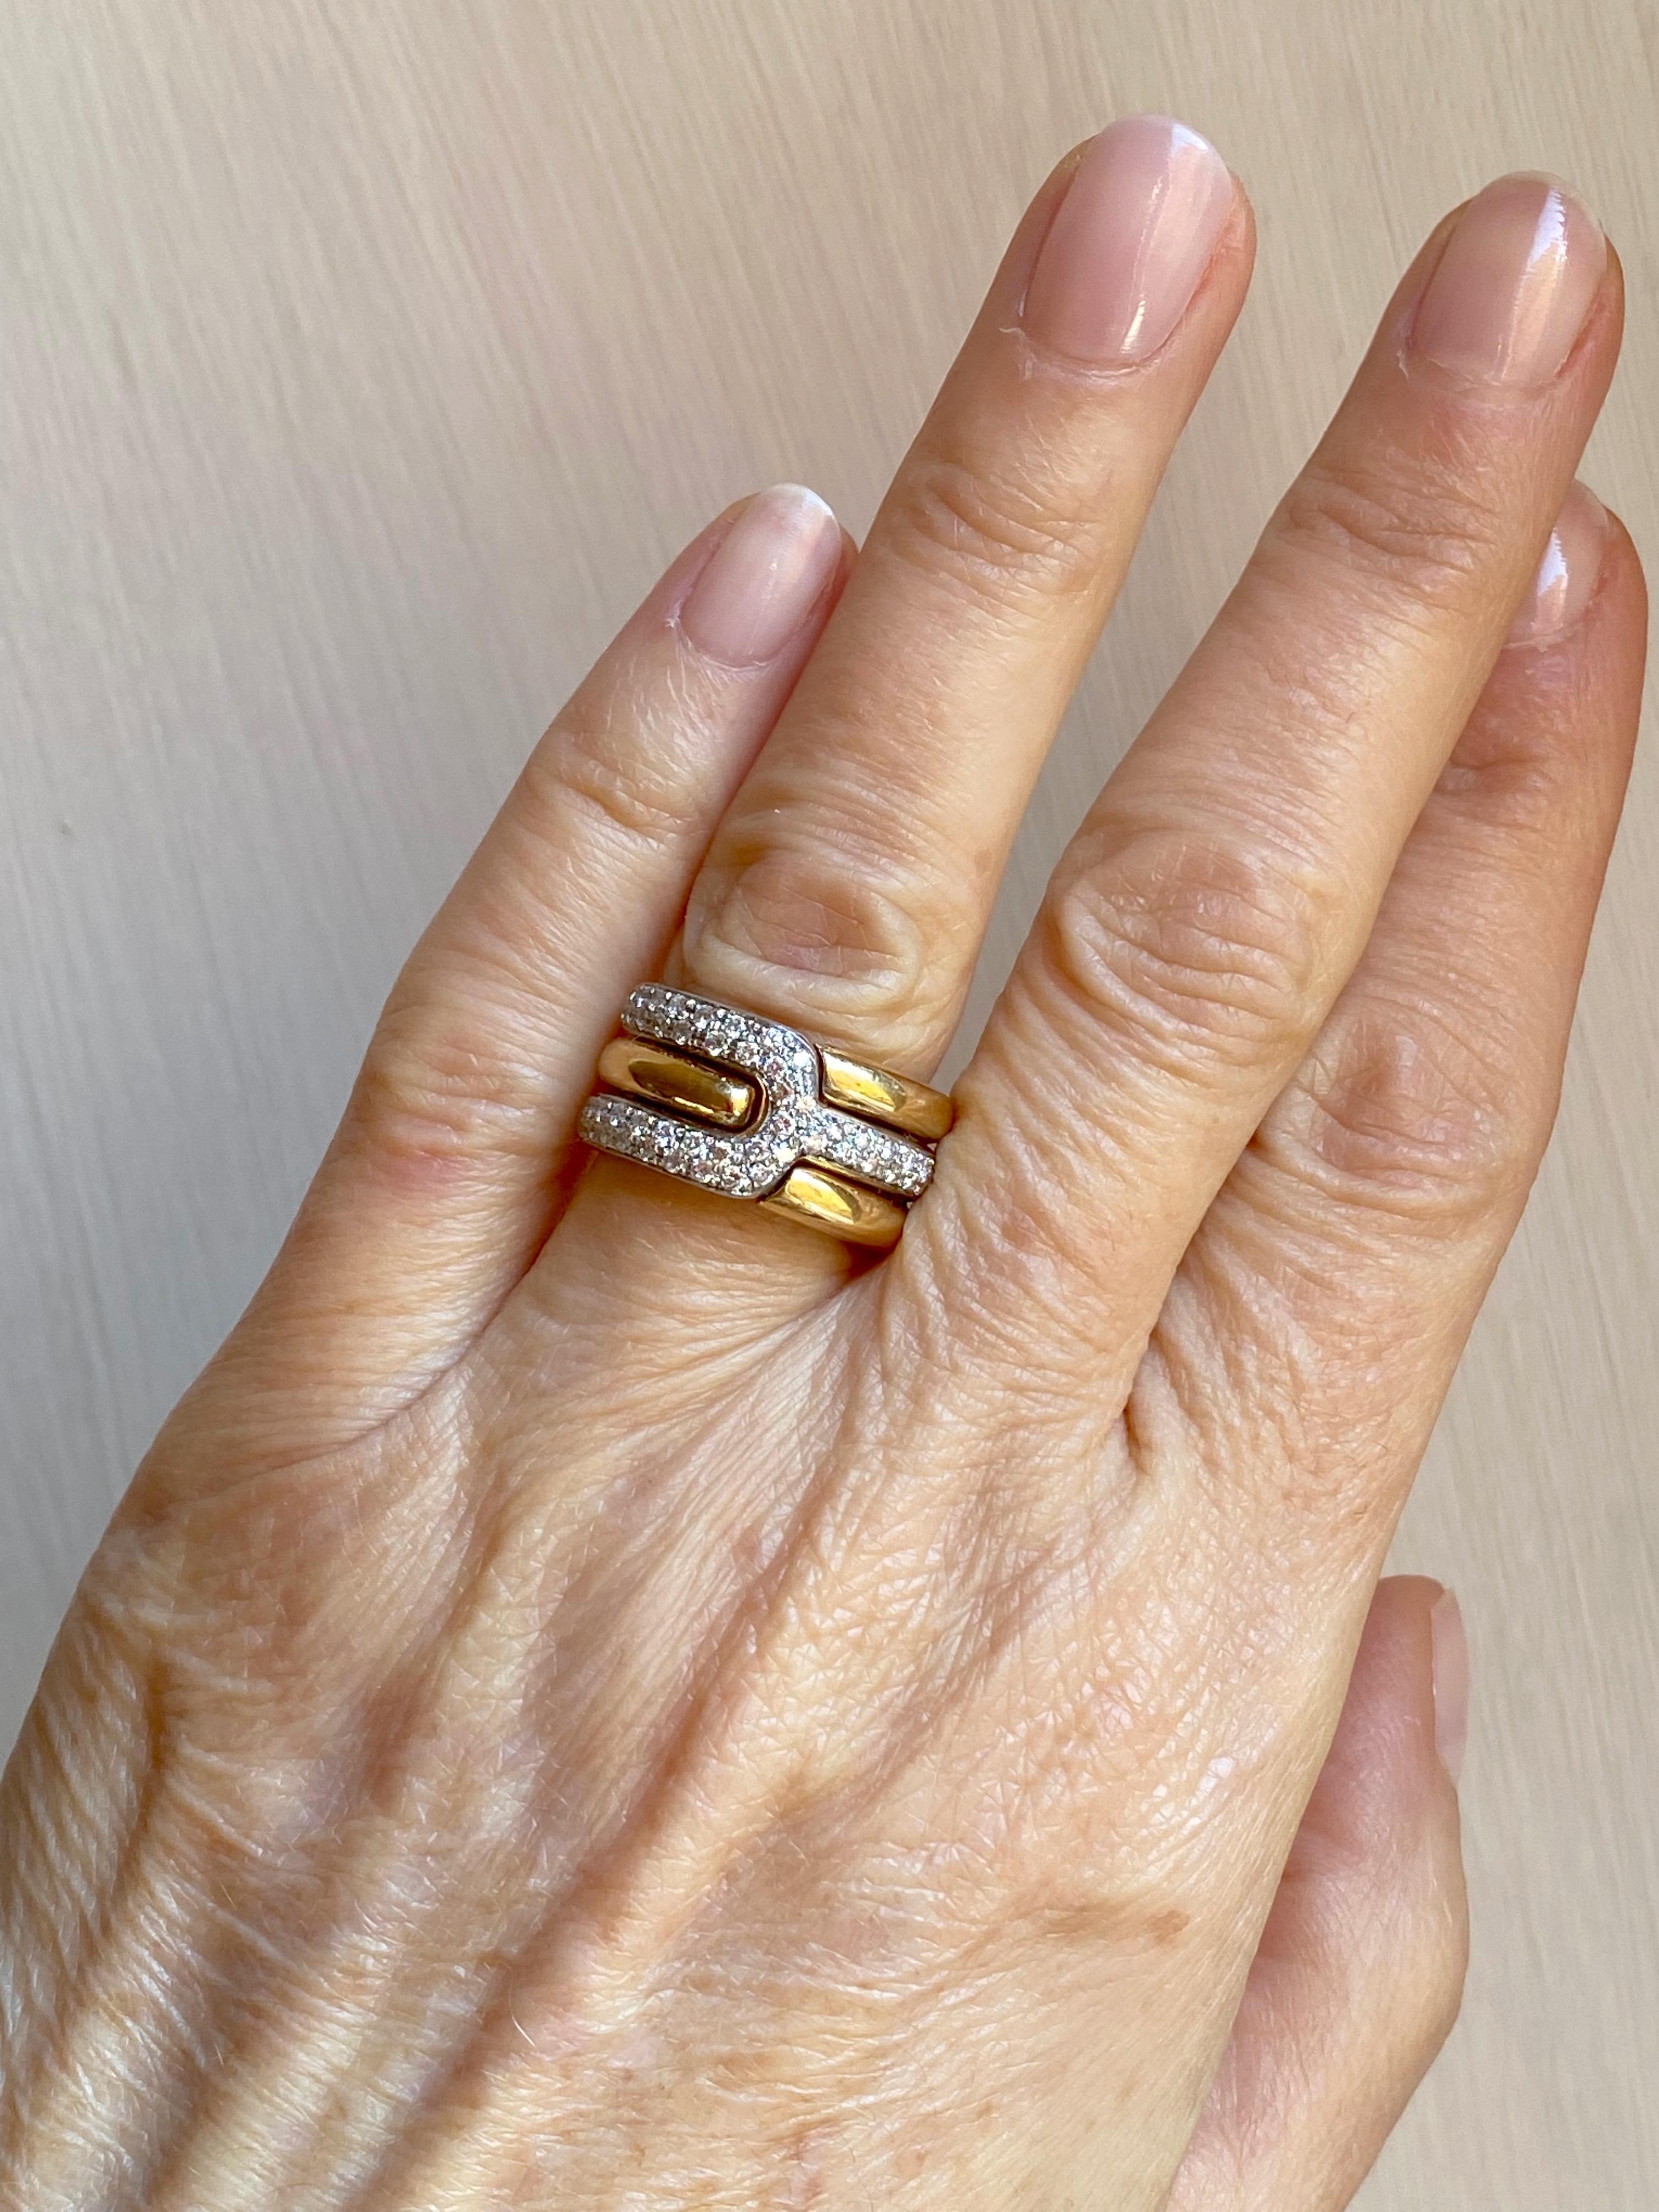 Introducing the Rossella Ugolini Modern Band Ring  a symphony of elegance in 18k gold. This extraordinary piece weaves a beautiful melody with 0,70 Carats pavé White Diamonds, creating a visual masterpiece.

Crafted in 18k yellow gold, the band